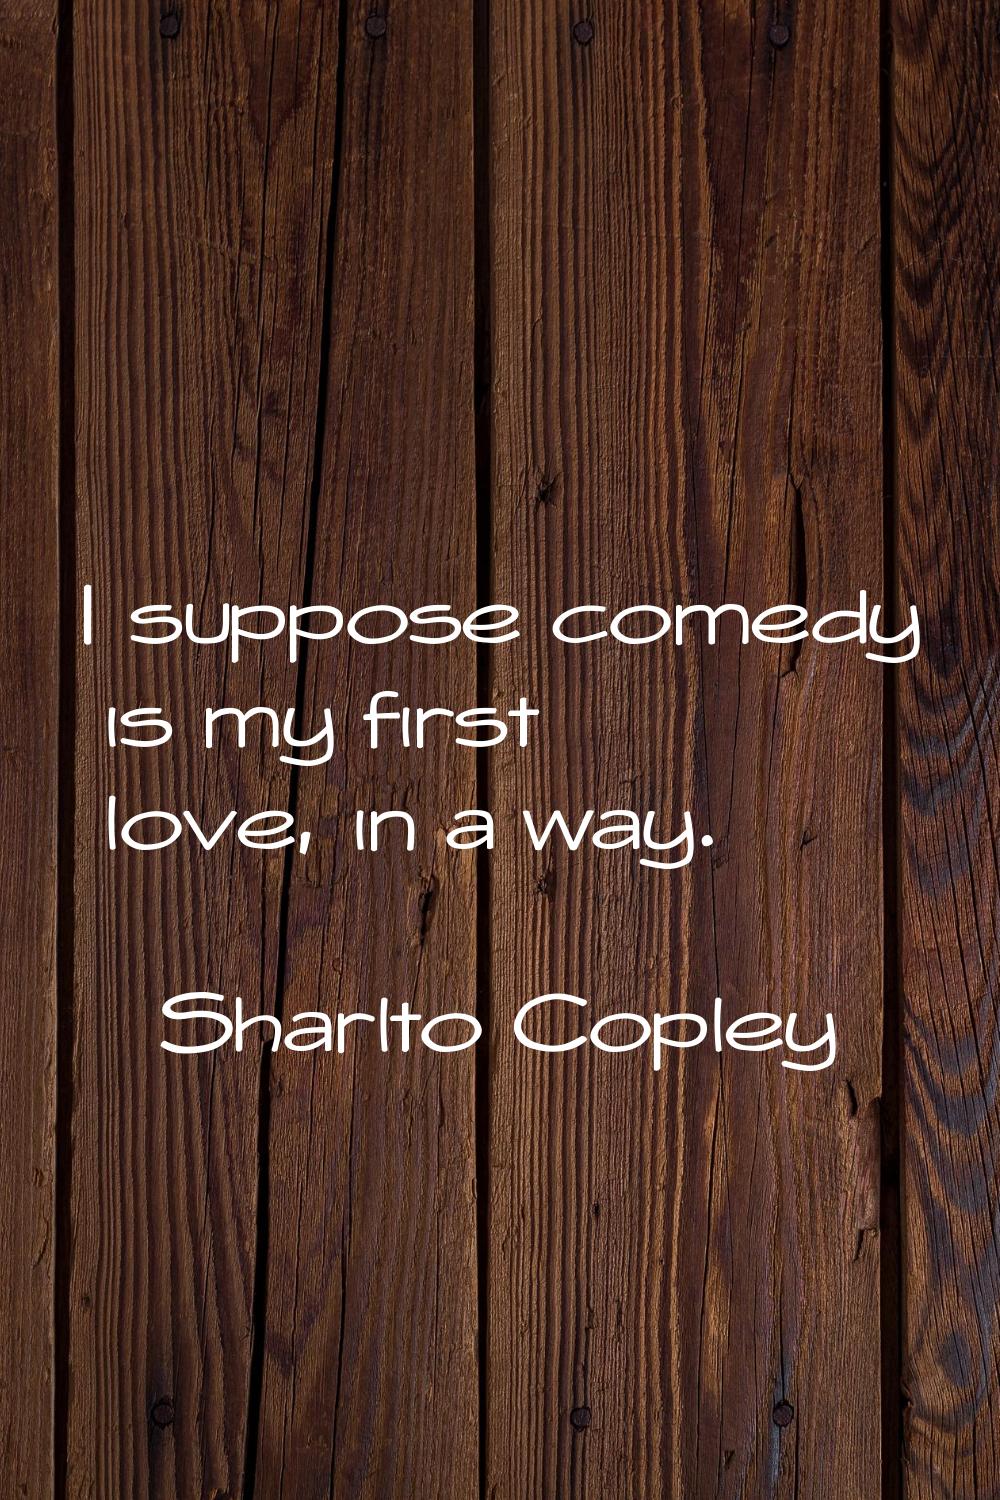 I suppose comedy is my first love, in a way.